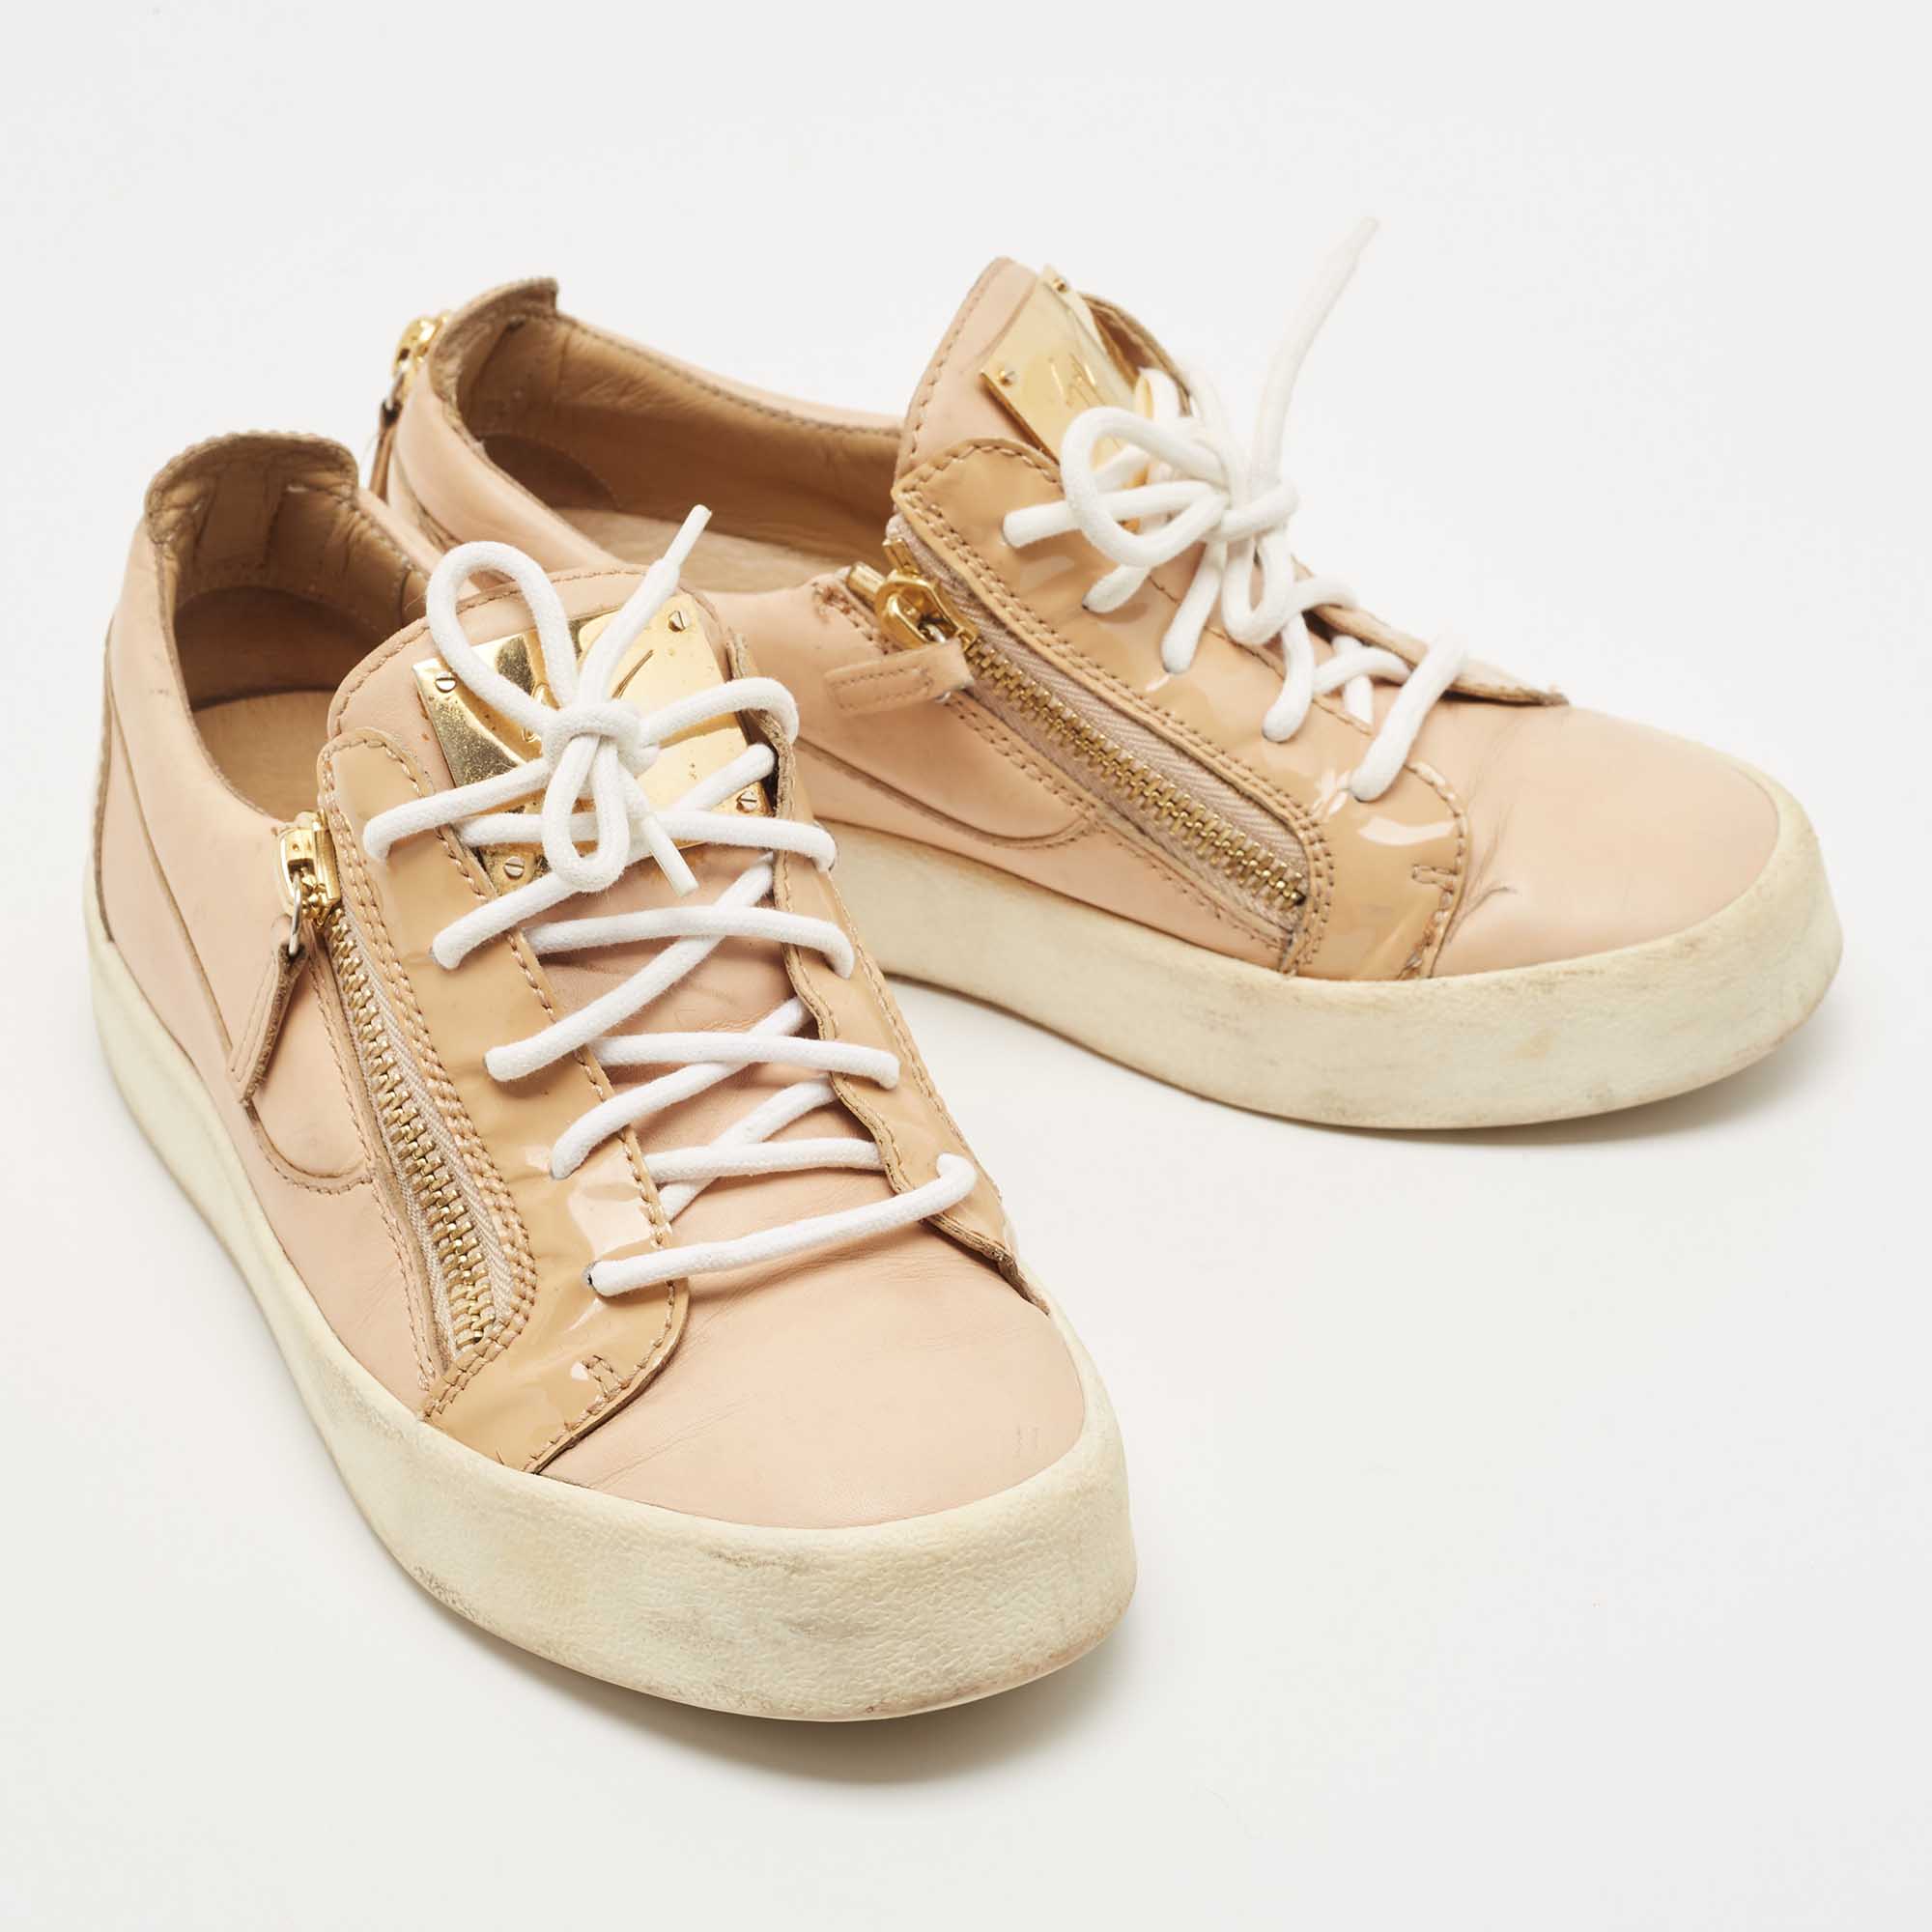 Giuseppe Zanotti Beige Patent And Leather Low Top Sneakers Size 38